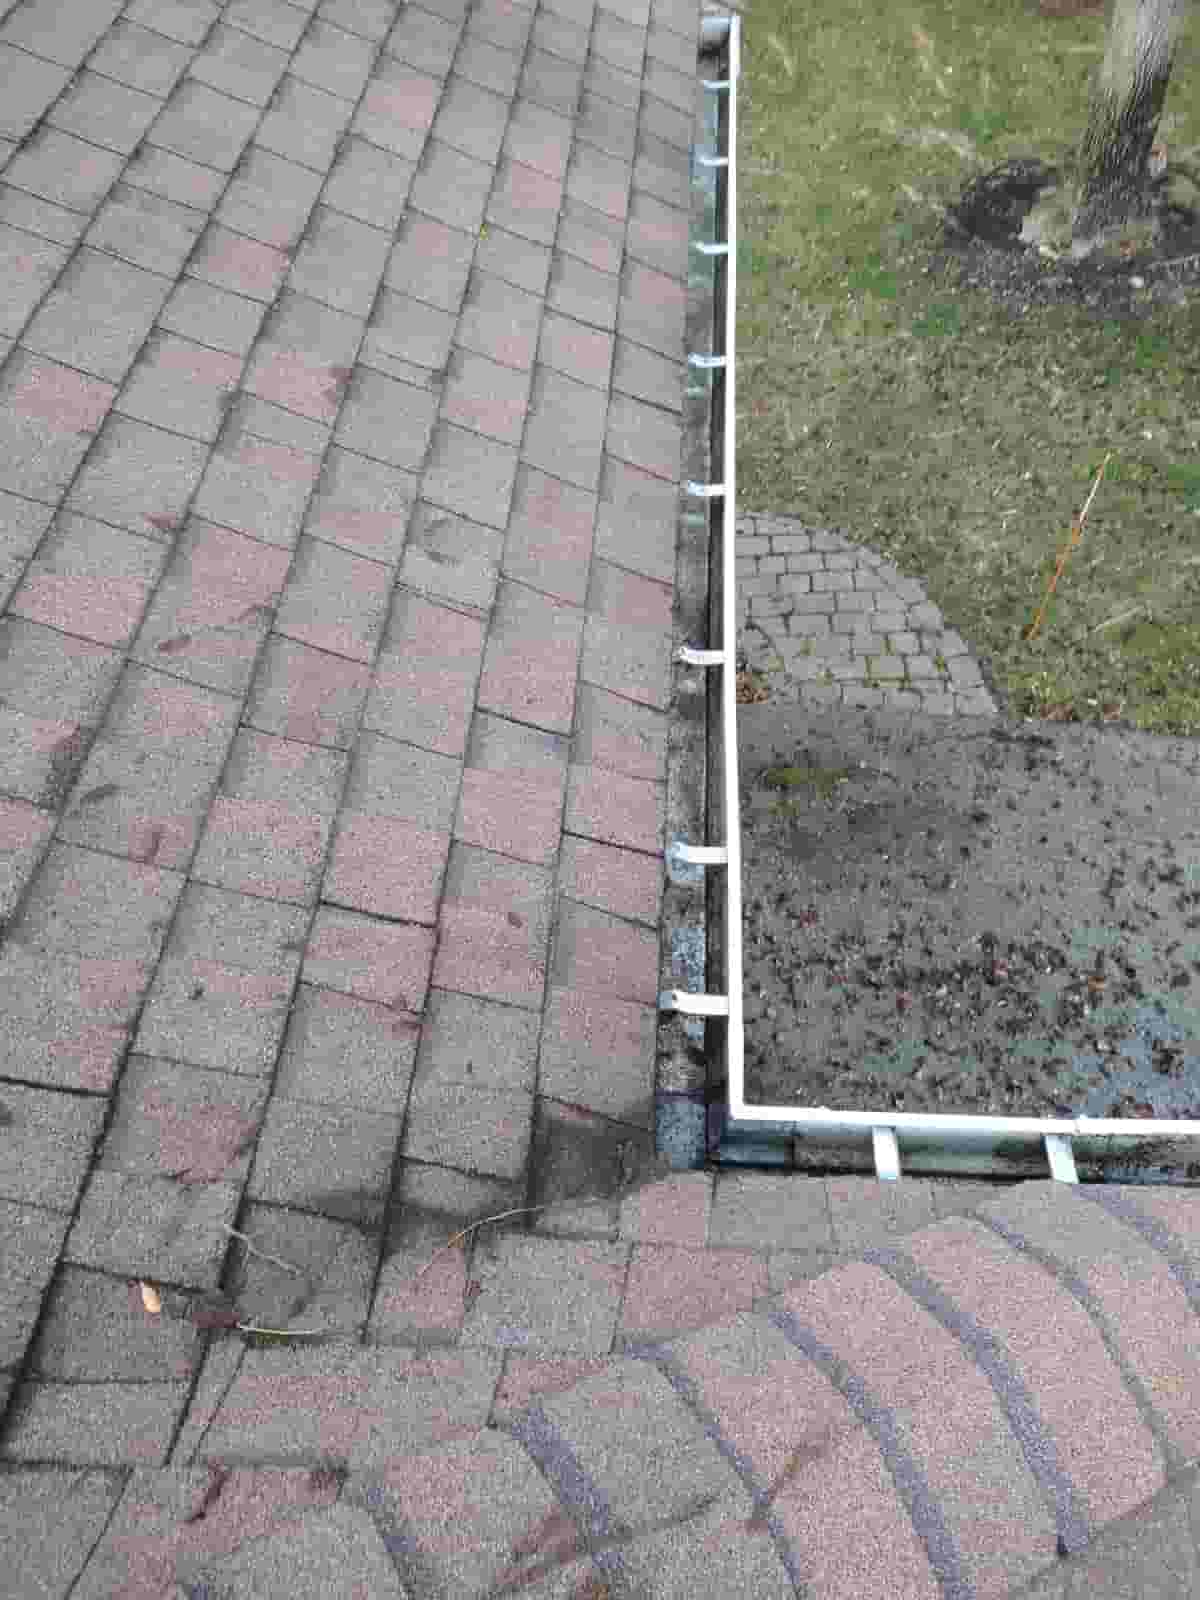 rain gutter cleaning and repair